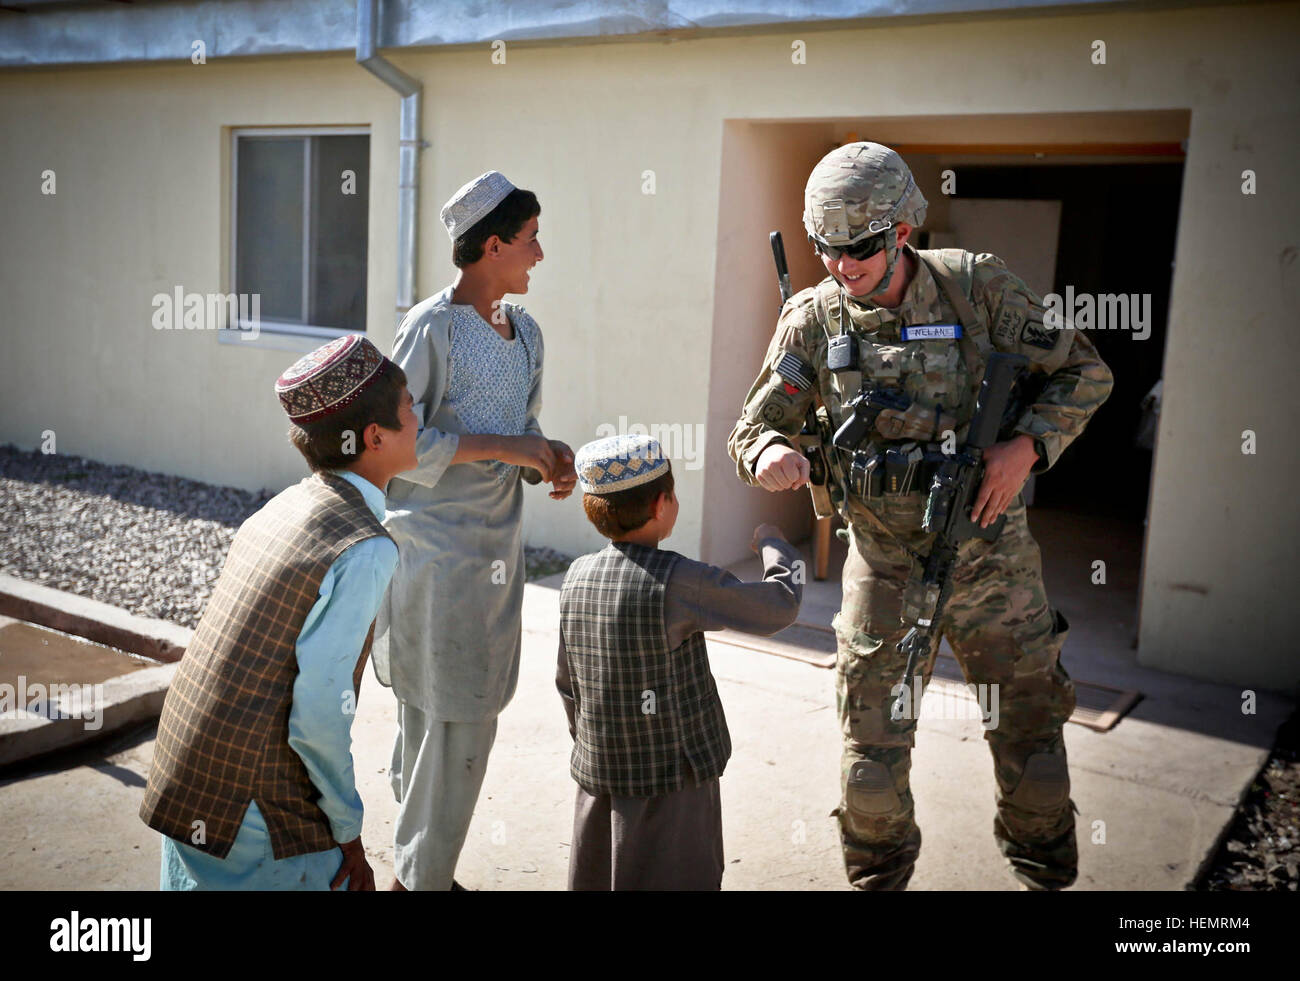 Sgt. Jeffrey Nelan, a Infantryman with the 184th Security Force Assistance Team, California National Guard, plays with Afghan children during a leadership engagement at the Afghan Uniformed Police headquarters in Uruzgan Province, Afghanistan, Sept. 25, 2013. (U.S. Army photo by Cpl. Harold Flynn Leadership Engagement Security 130925-A-XQ077-779 Stock Photo